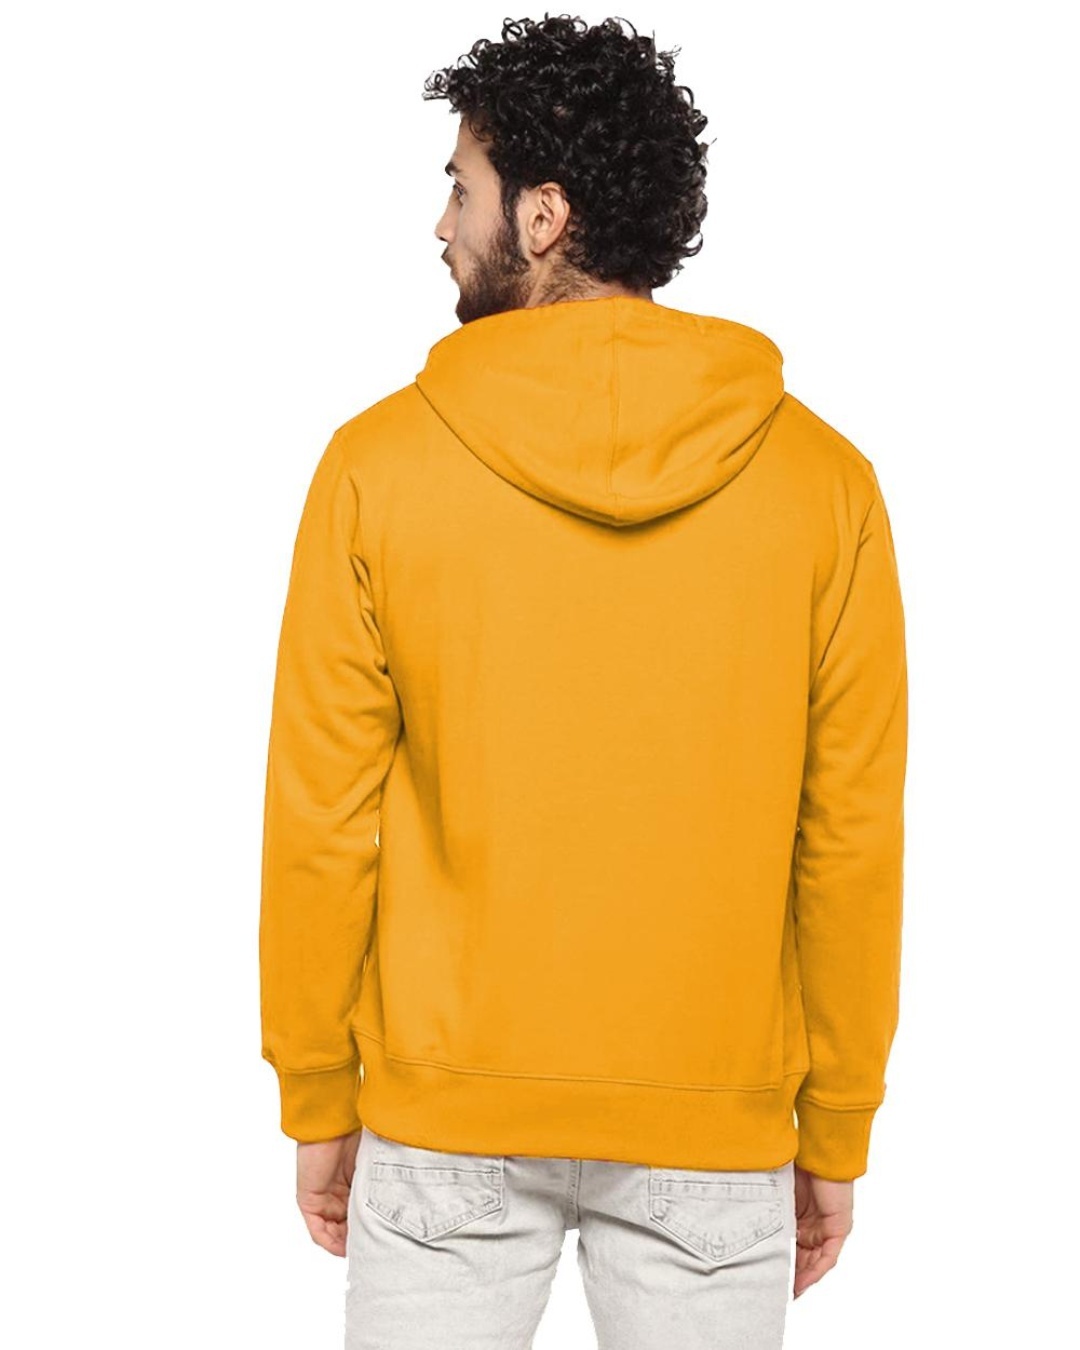 Shop Men's Yellow Attack on Titan Graphic Printed Hoodie-Back